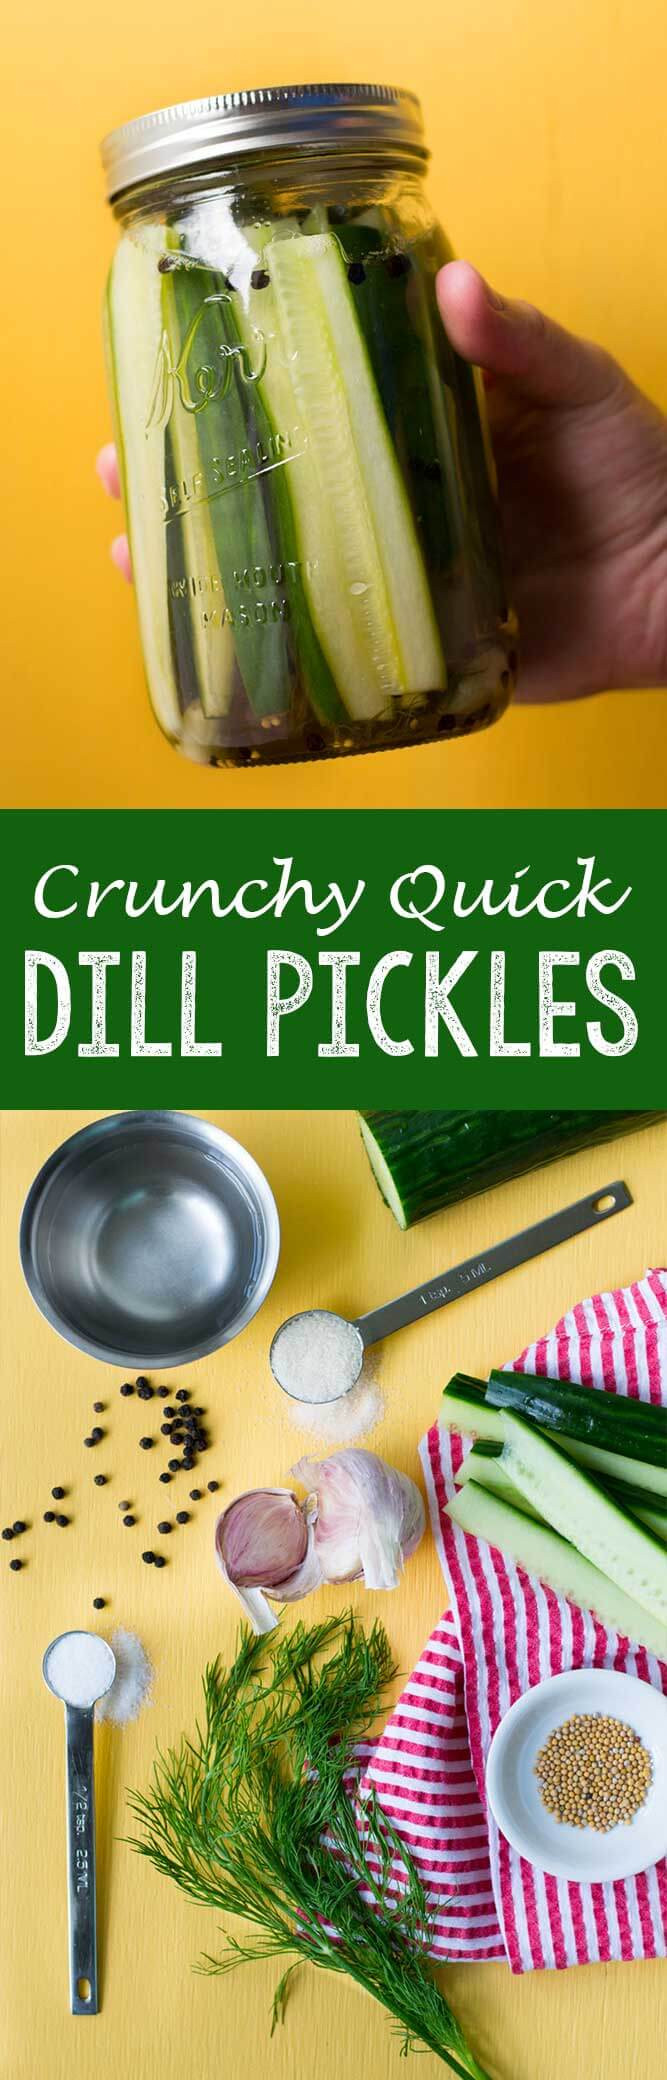 Quick Refrigerator Dill Pickles
 Crunchy Quick Dill Pickles Easy Peasy Meals